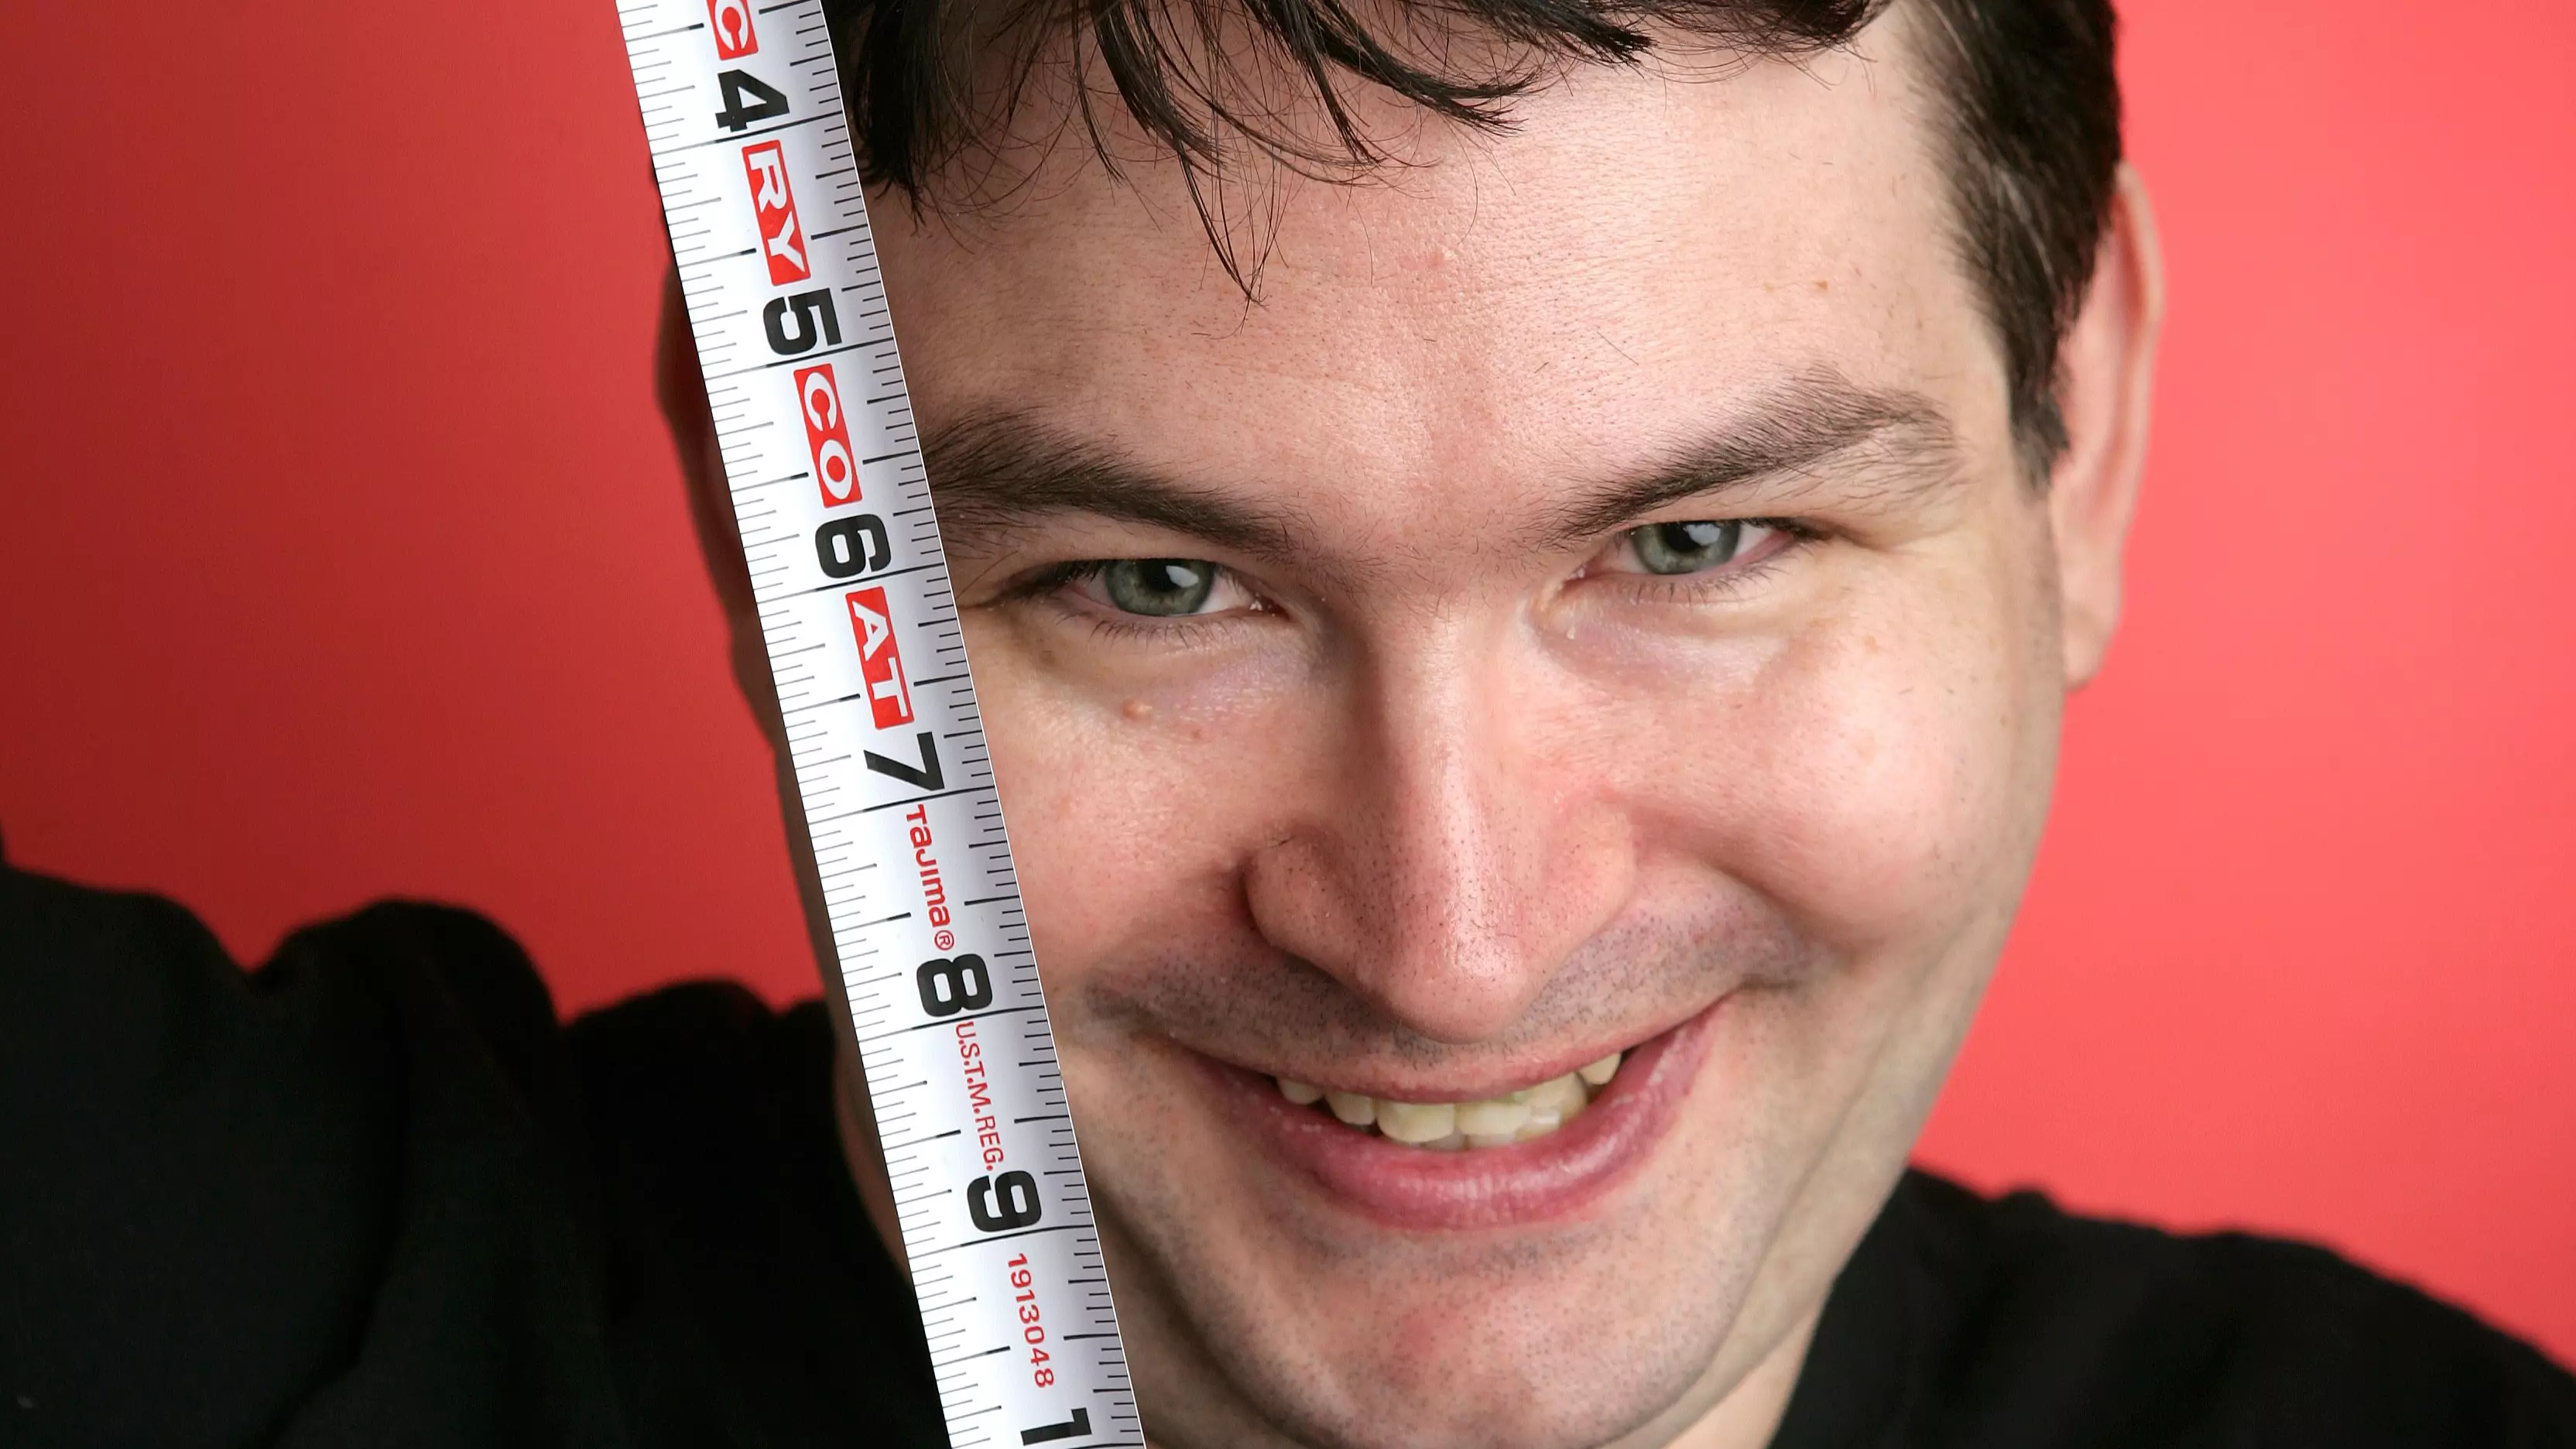 Jonah Falcon Answers Big Questions He's Always Asked About Having World's Largest Penis